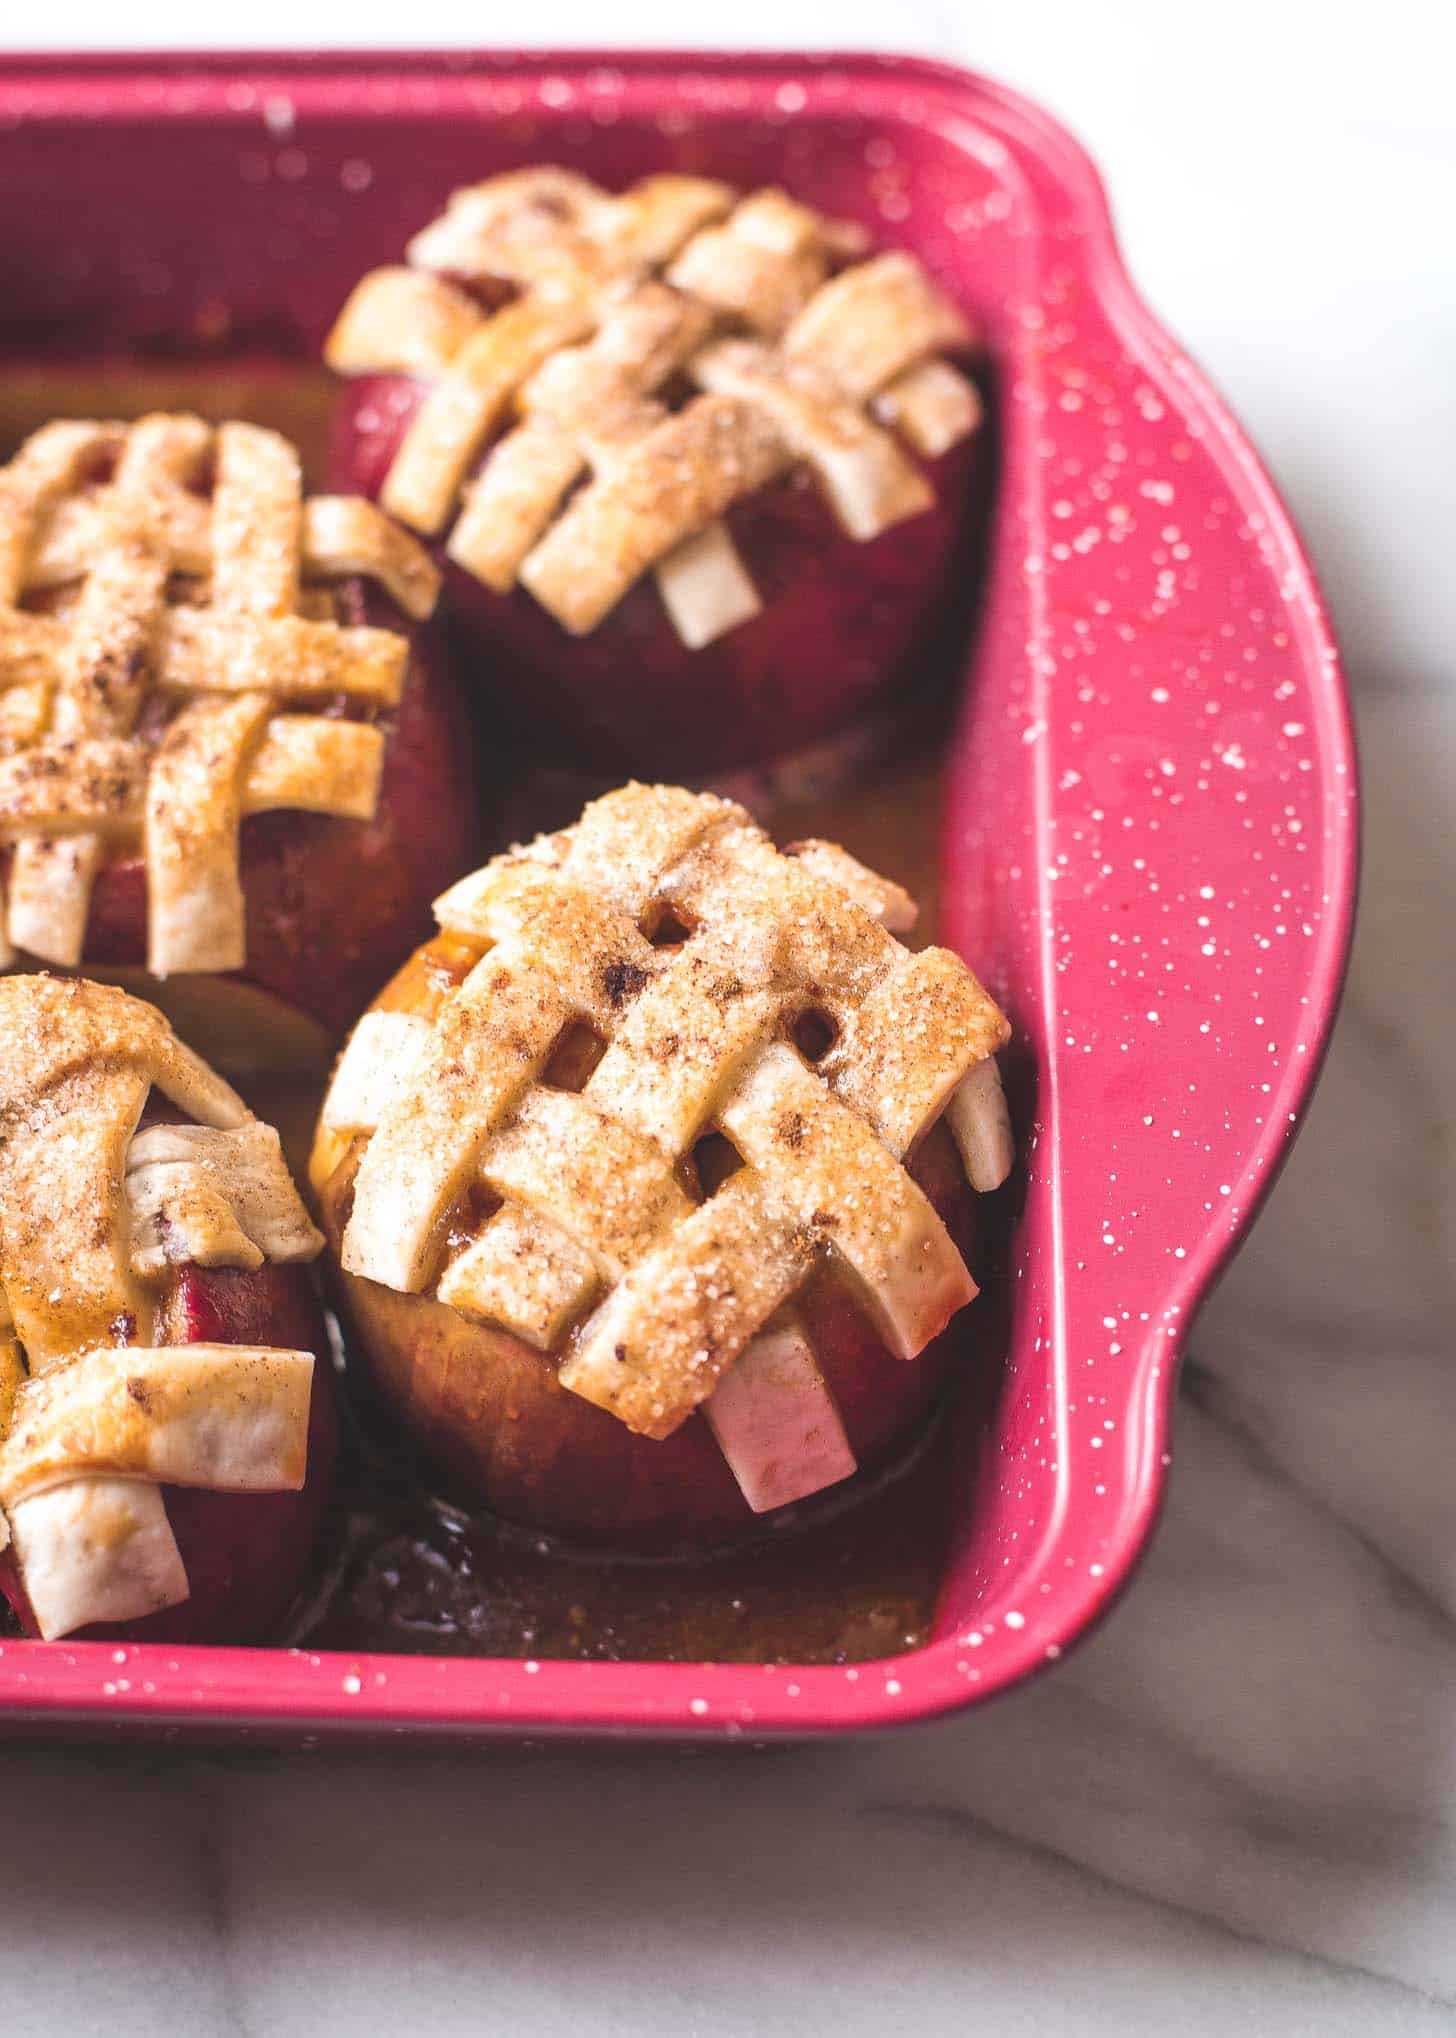 Caramel Apple Pie Baked Apples in a red baking dish